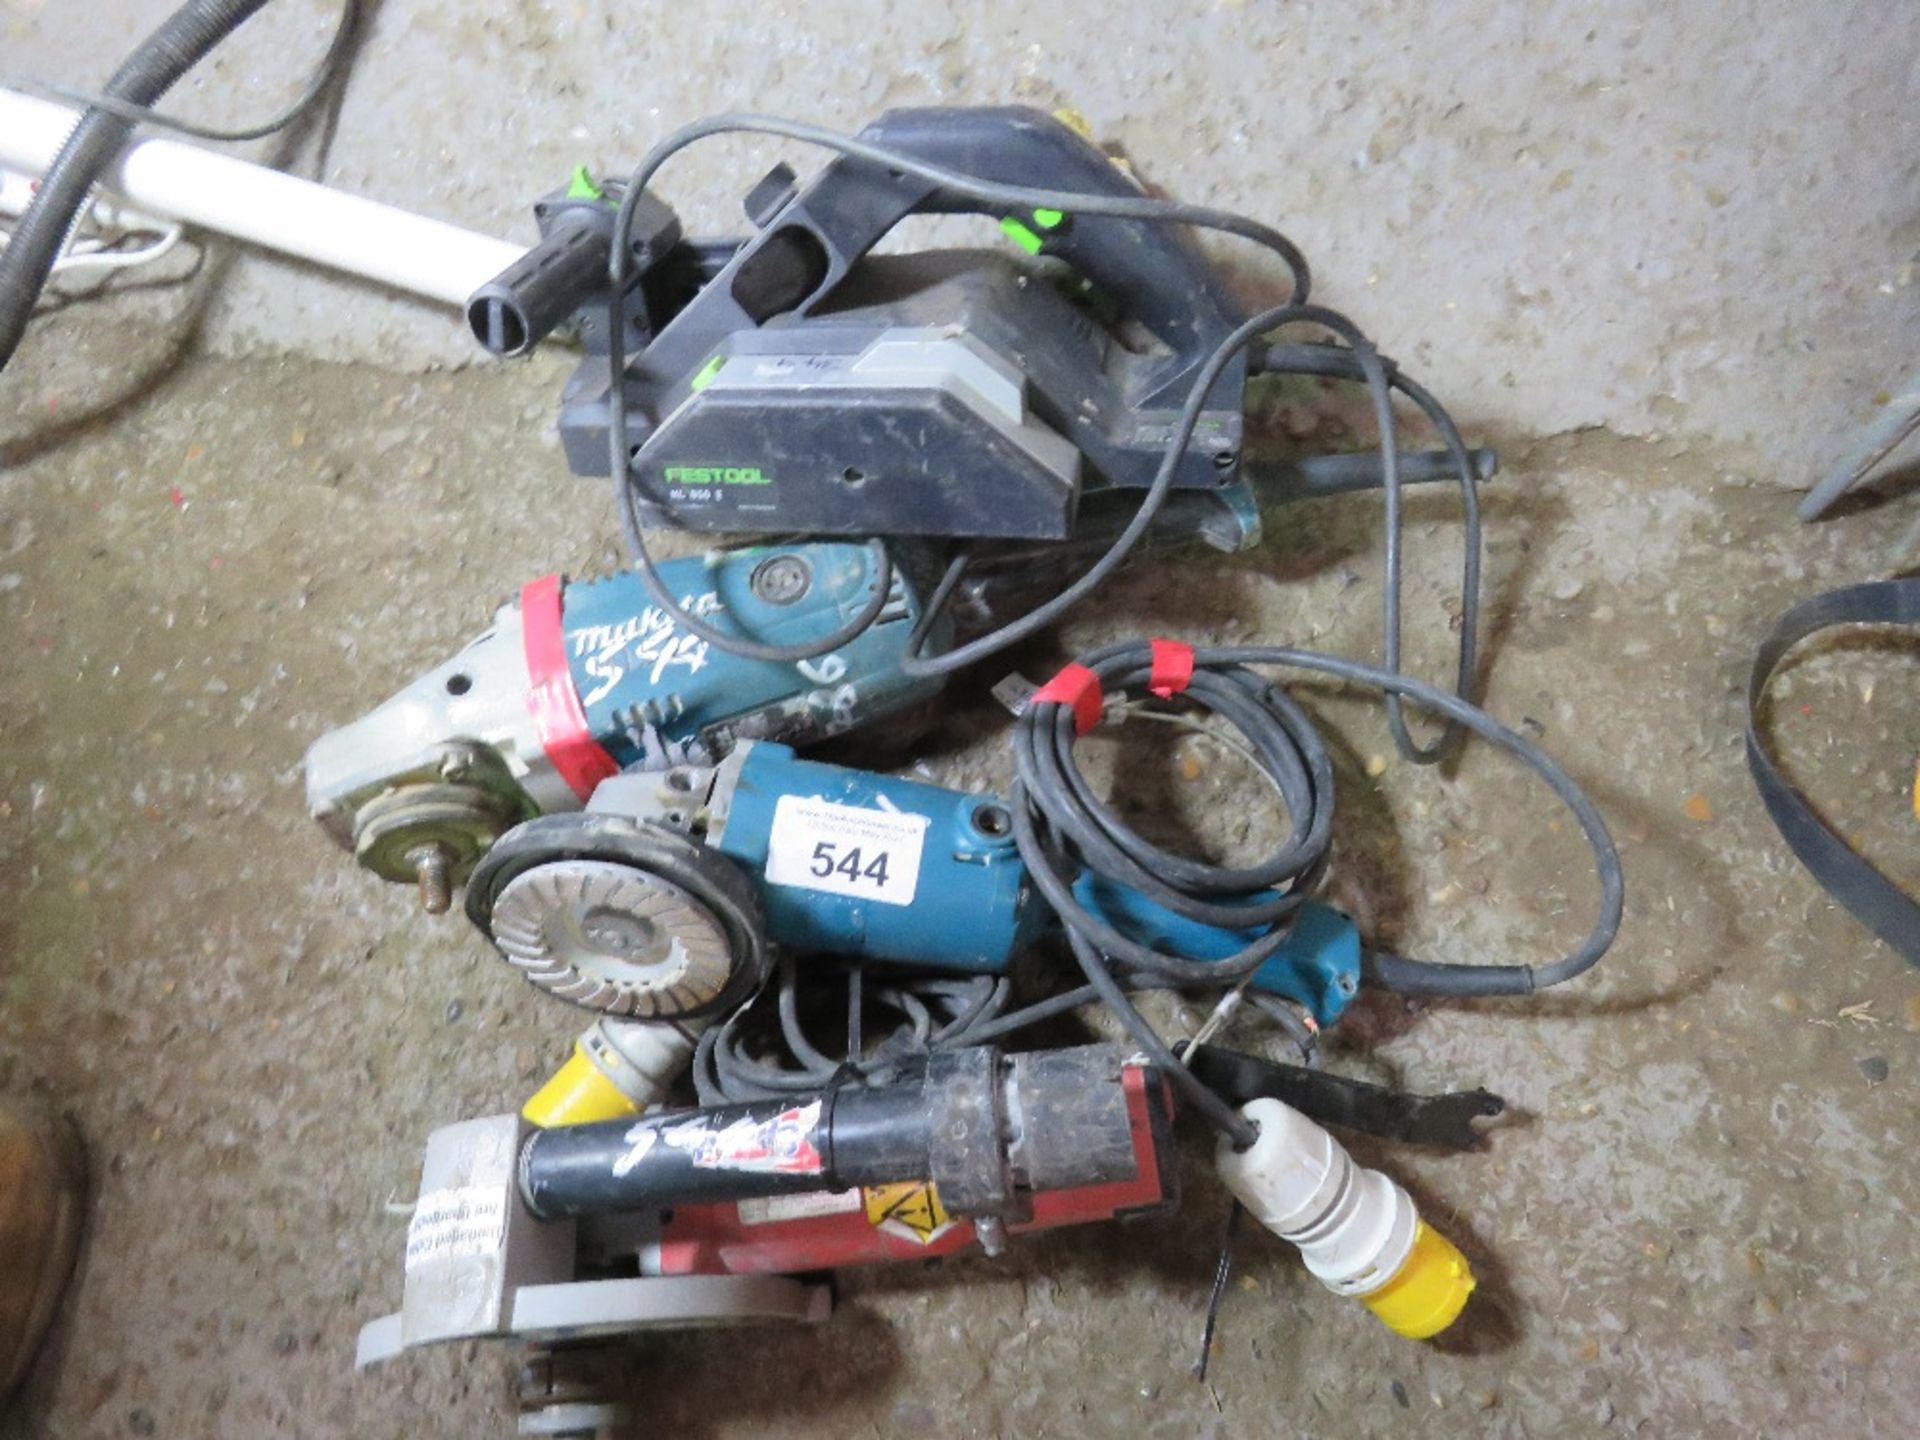 4 X POWER TOOLS: 3 X GRINDERS PLUS A PLANER. - Image 2 of 2